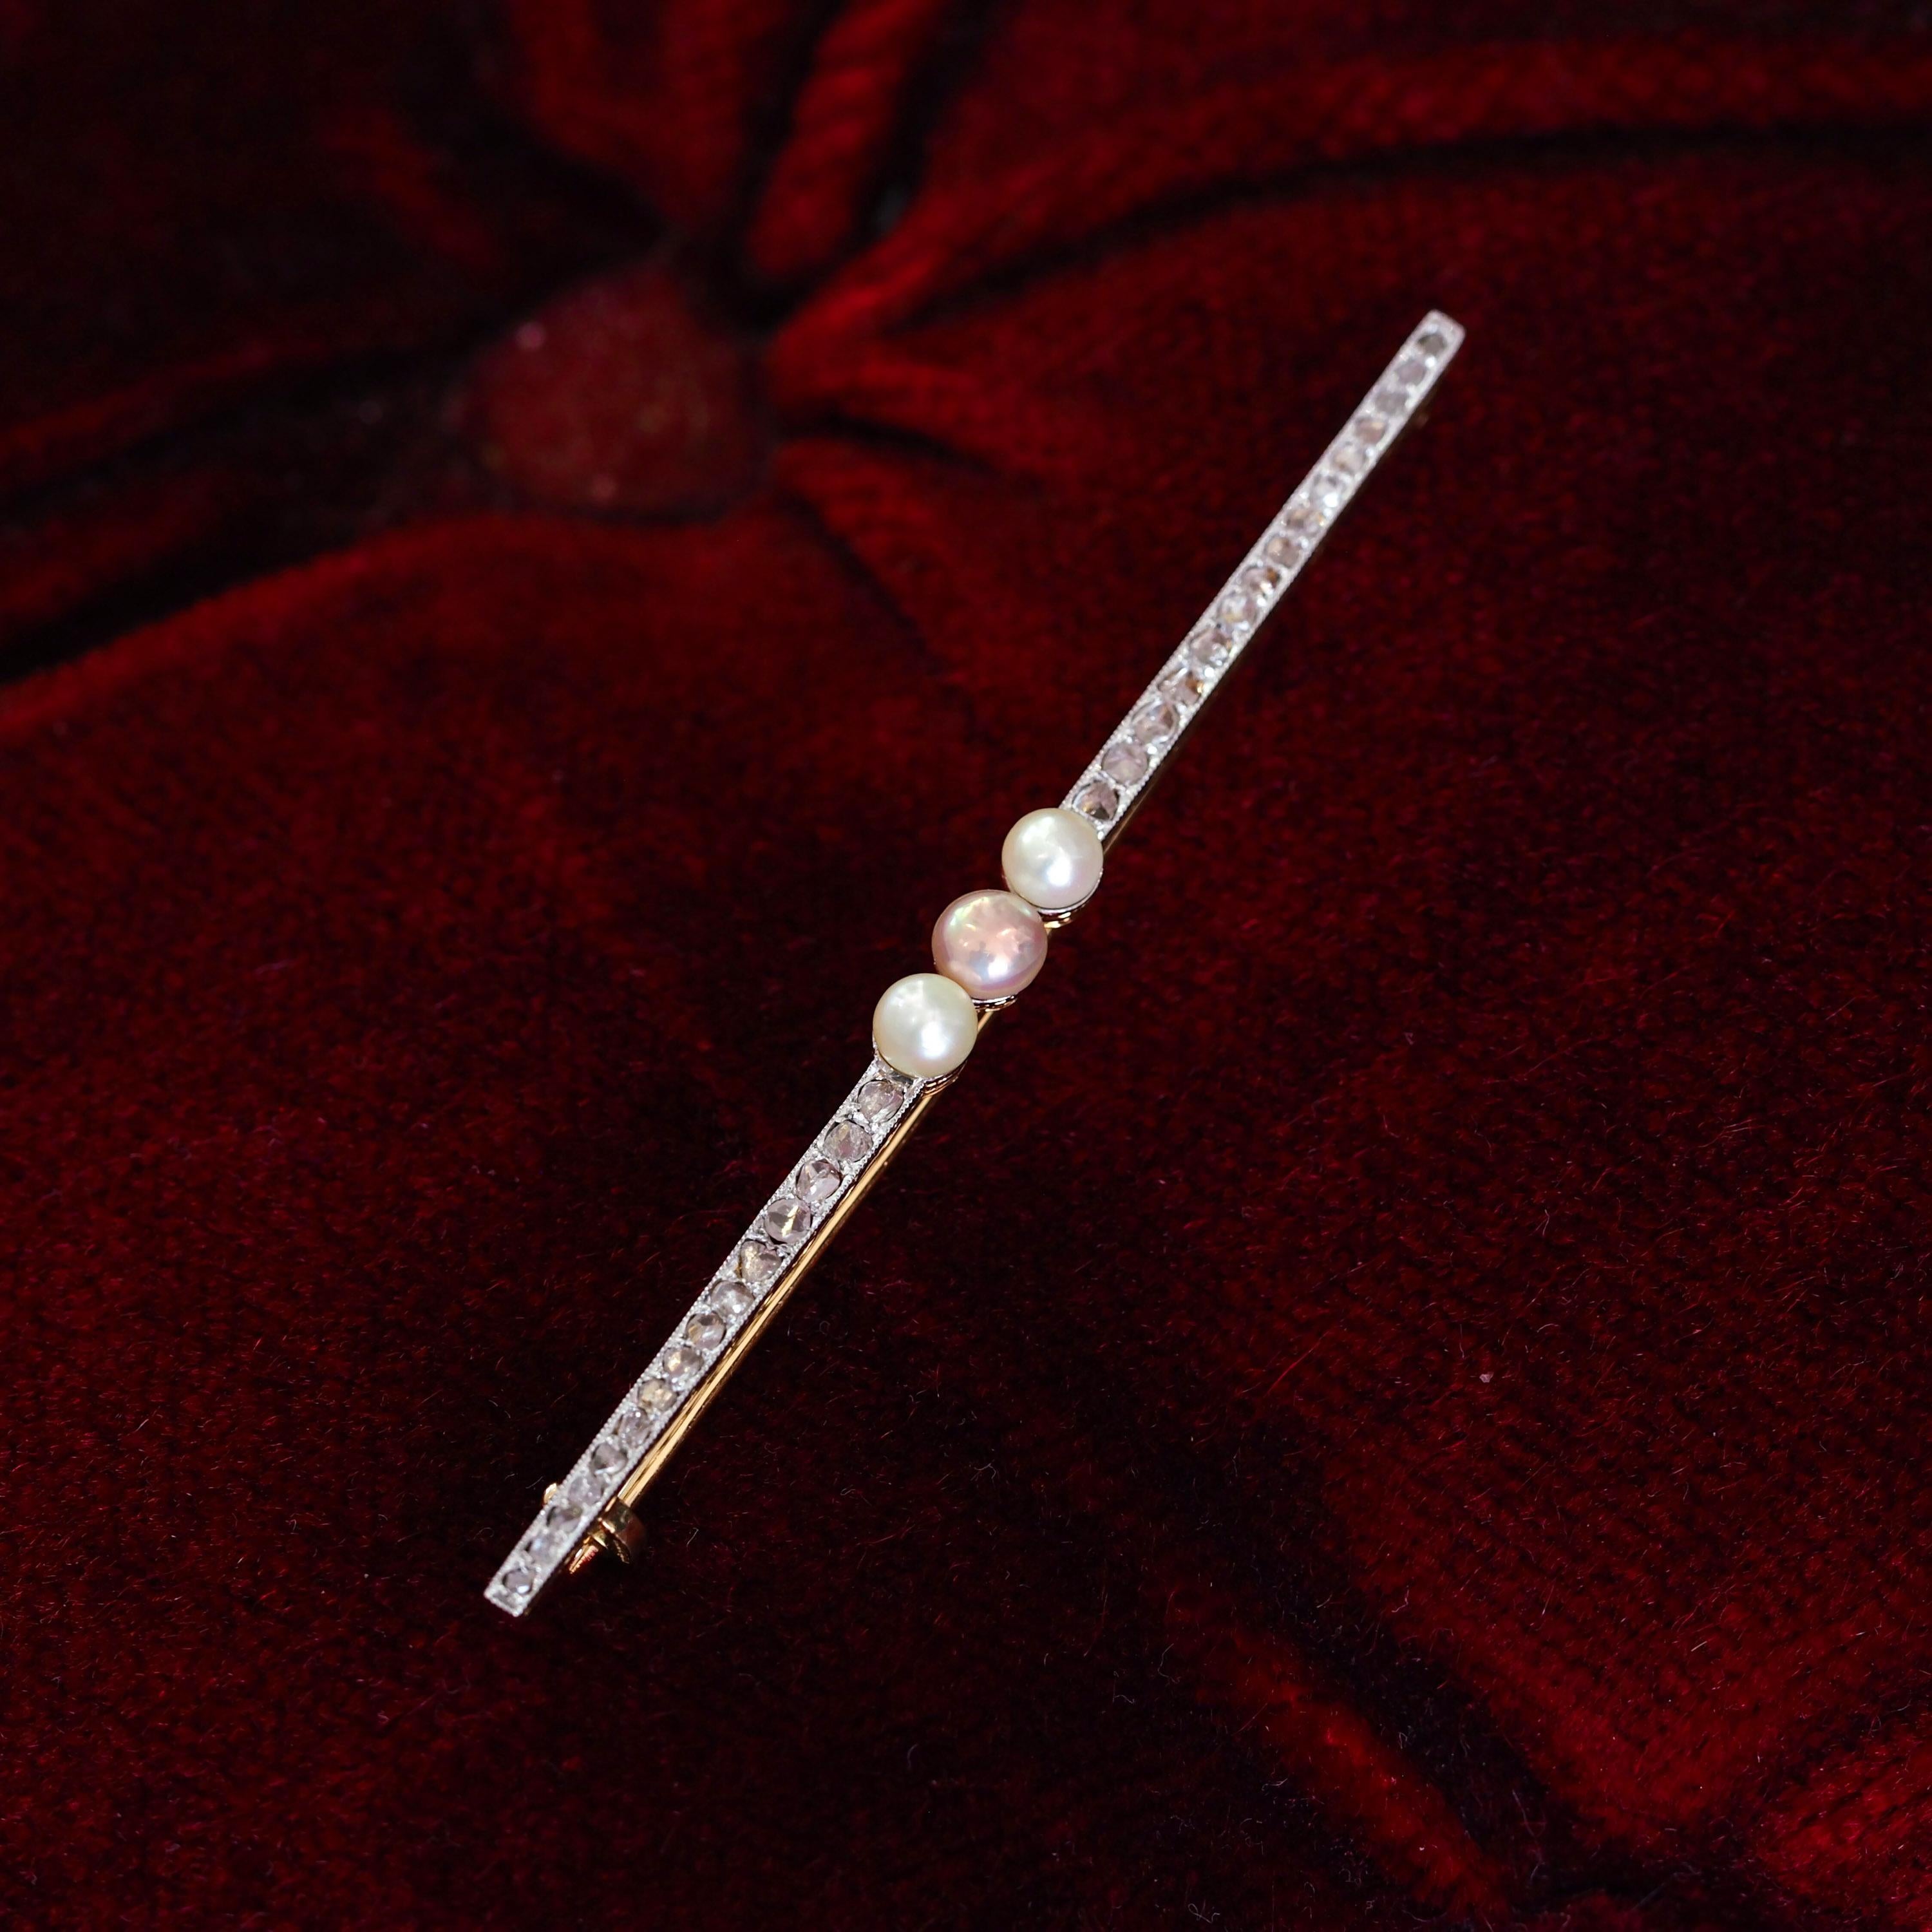 Antique 18ct Gold & Platinum Pink Pearl & Diamond Brooch - c.1920 For Sale 7